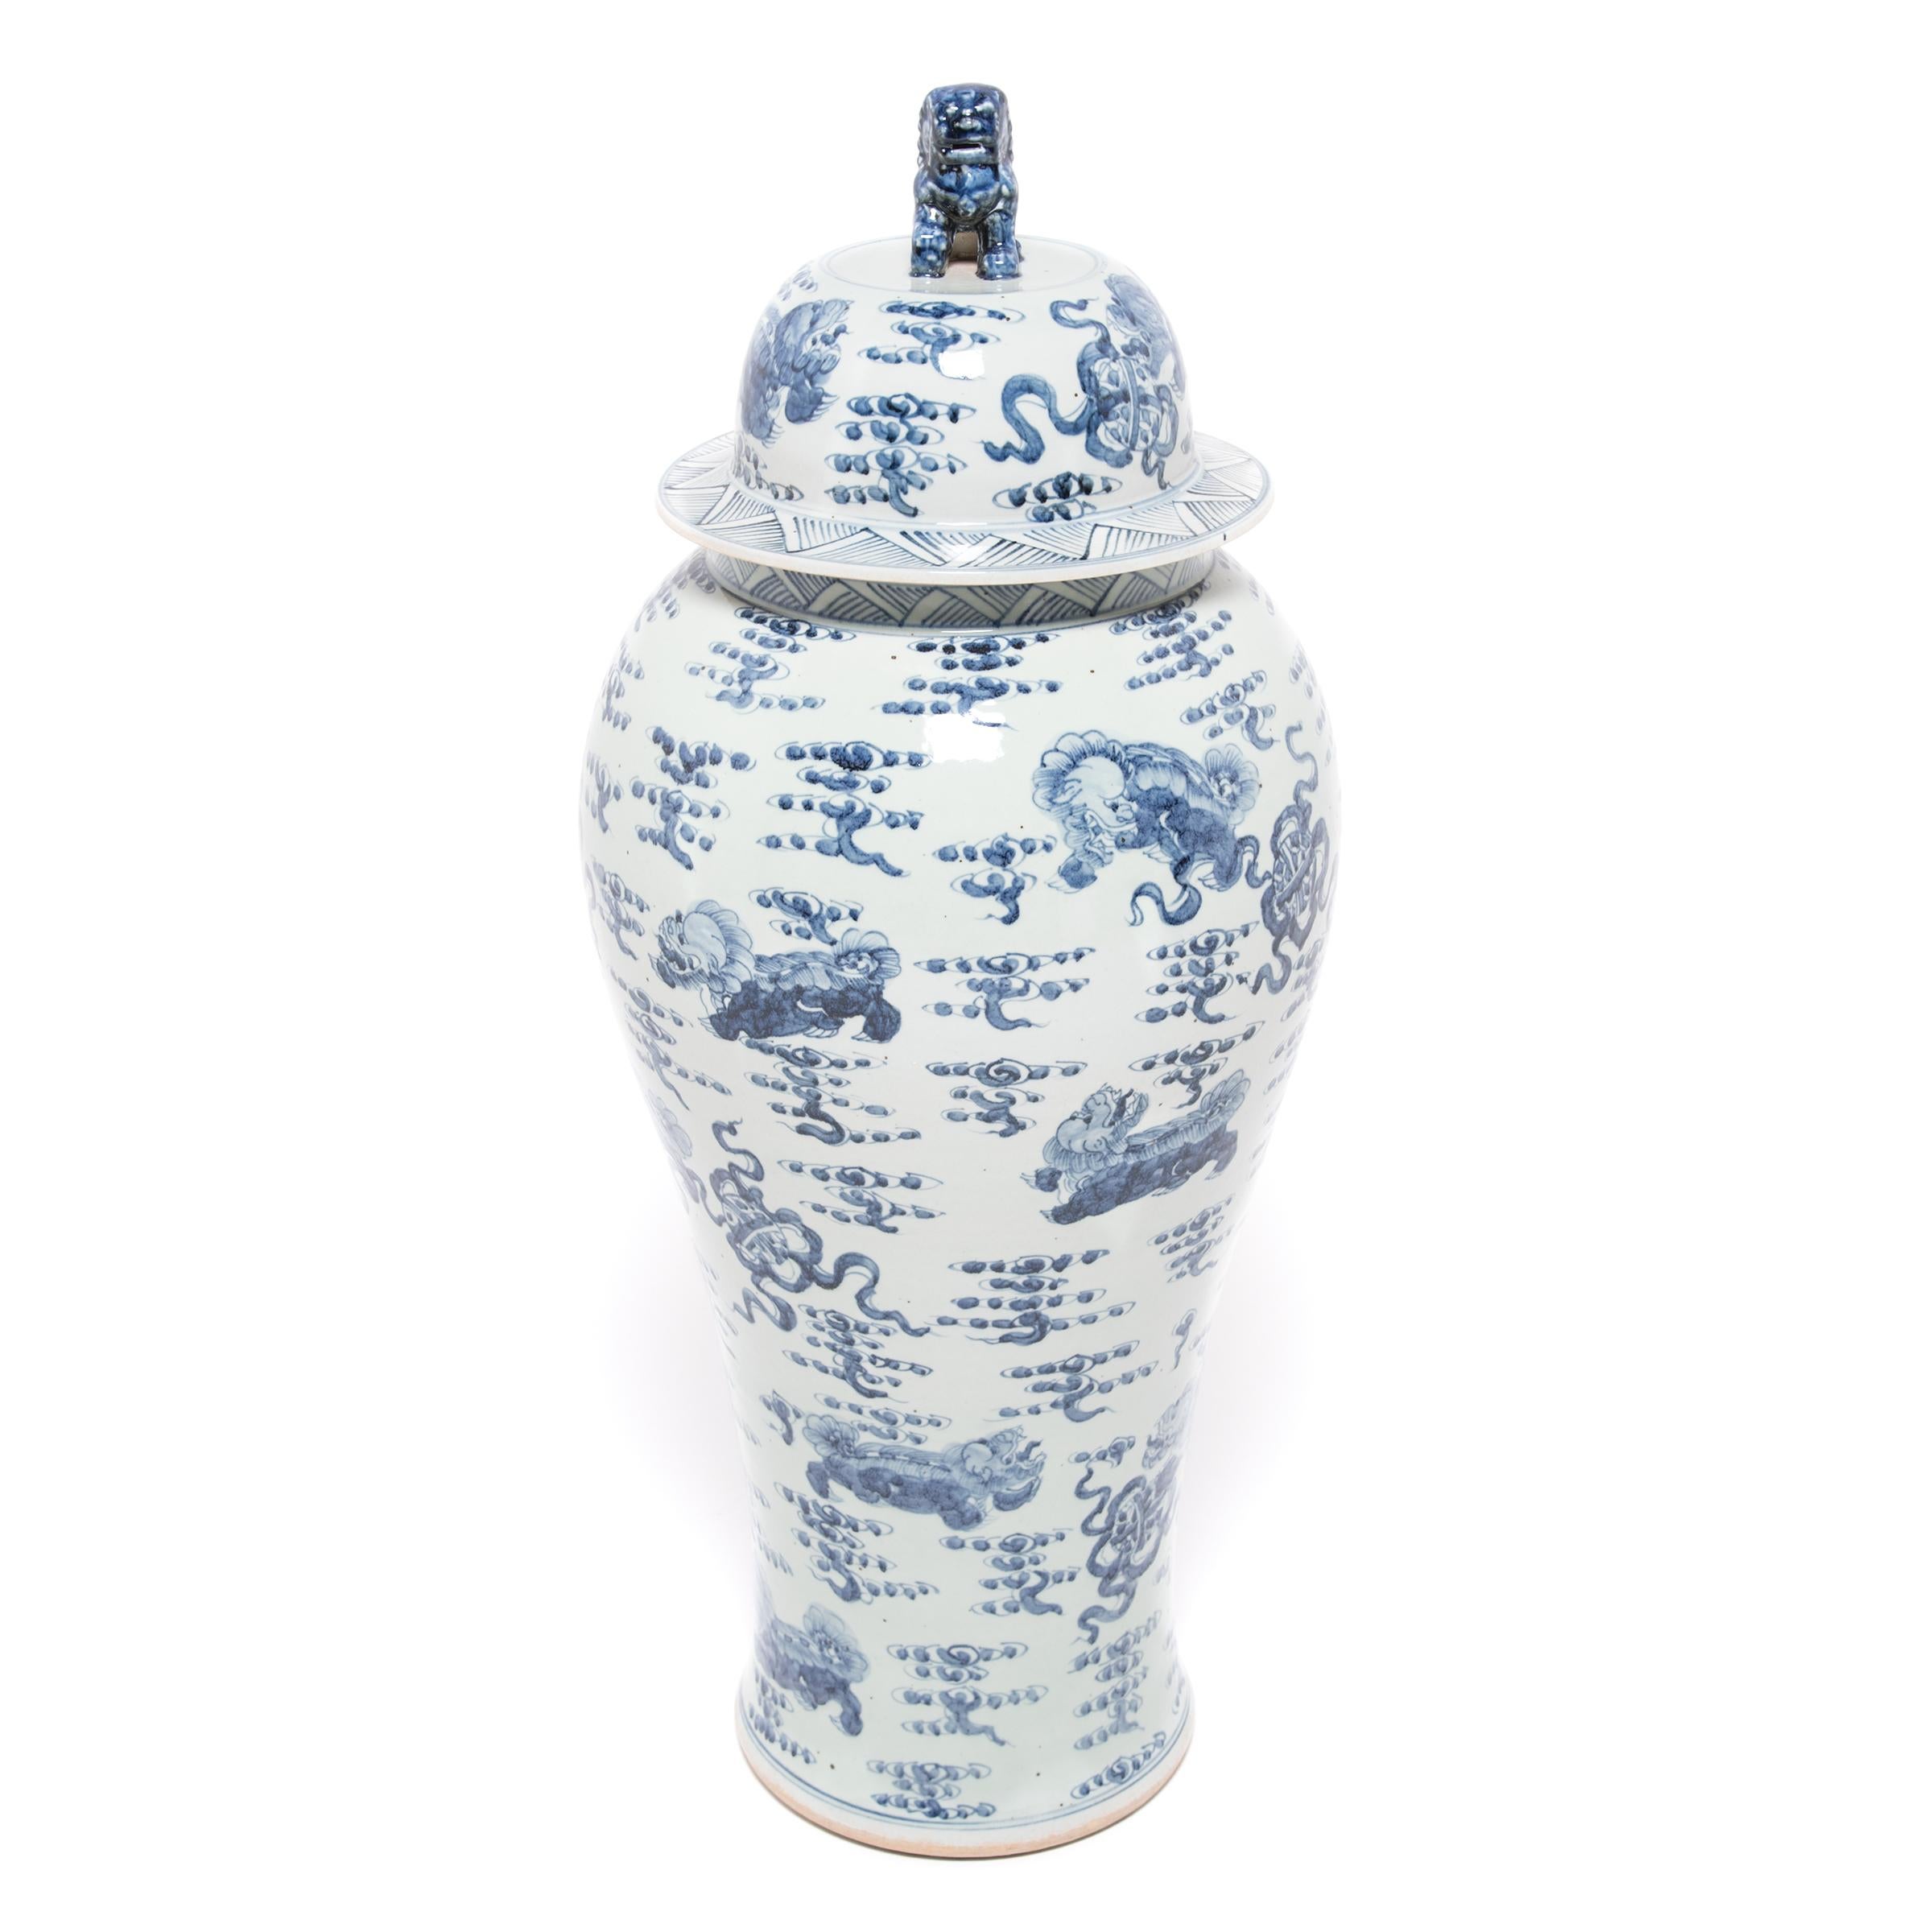 This contemporary monumental blue and white ginger jar is beautifully hand painted with mythical qilin and embroidered balls. As emblems of magnificence and benevolence, the lively qilin soar through the field of clouds with radiant joy. Capping the